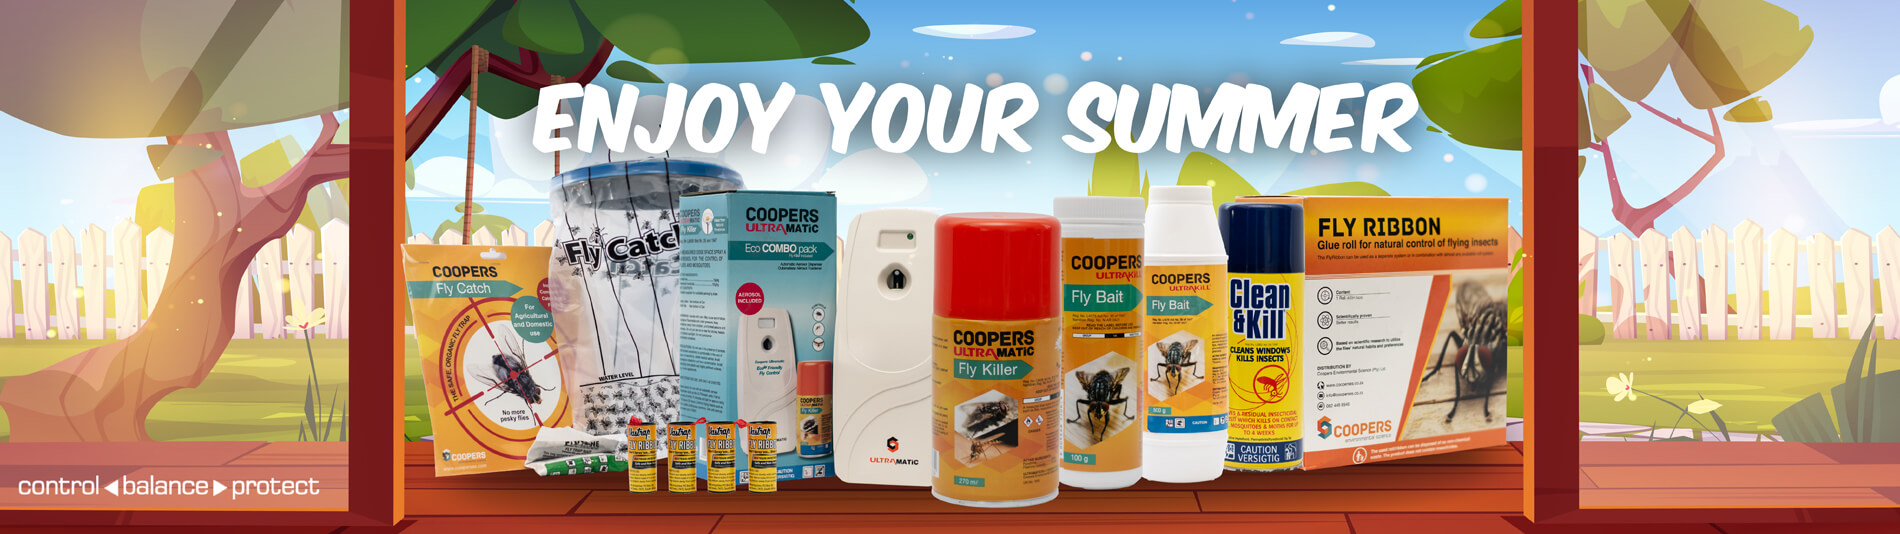 Coopers-Banner-Fly-Summer